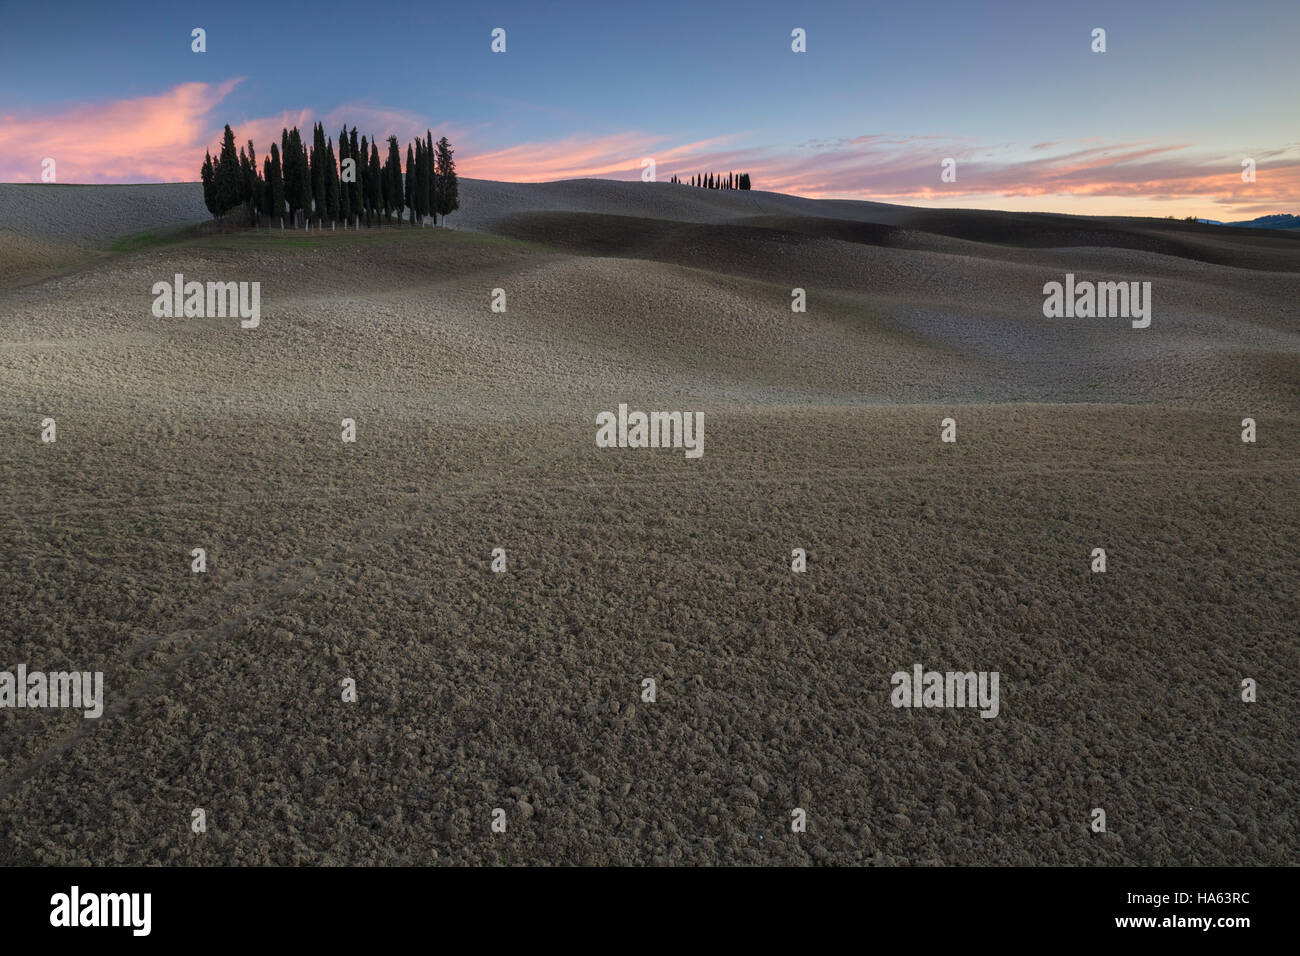 Sunset at the cypresses near San Quirico d'Orcia, Val d'Orcia, Tuscany, Italy. Stock Photo